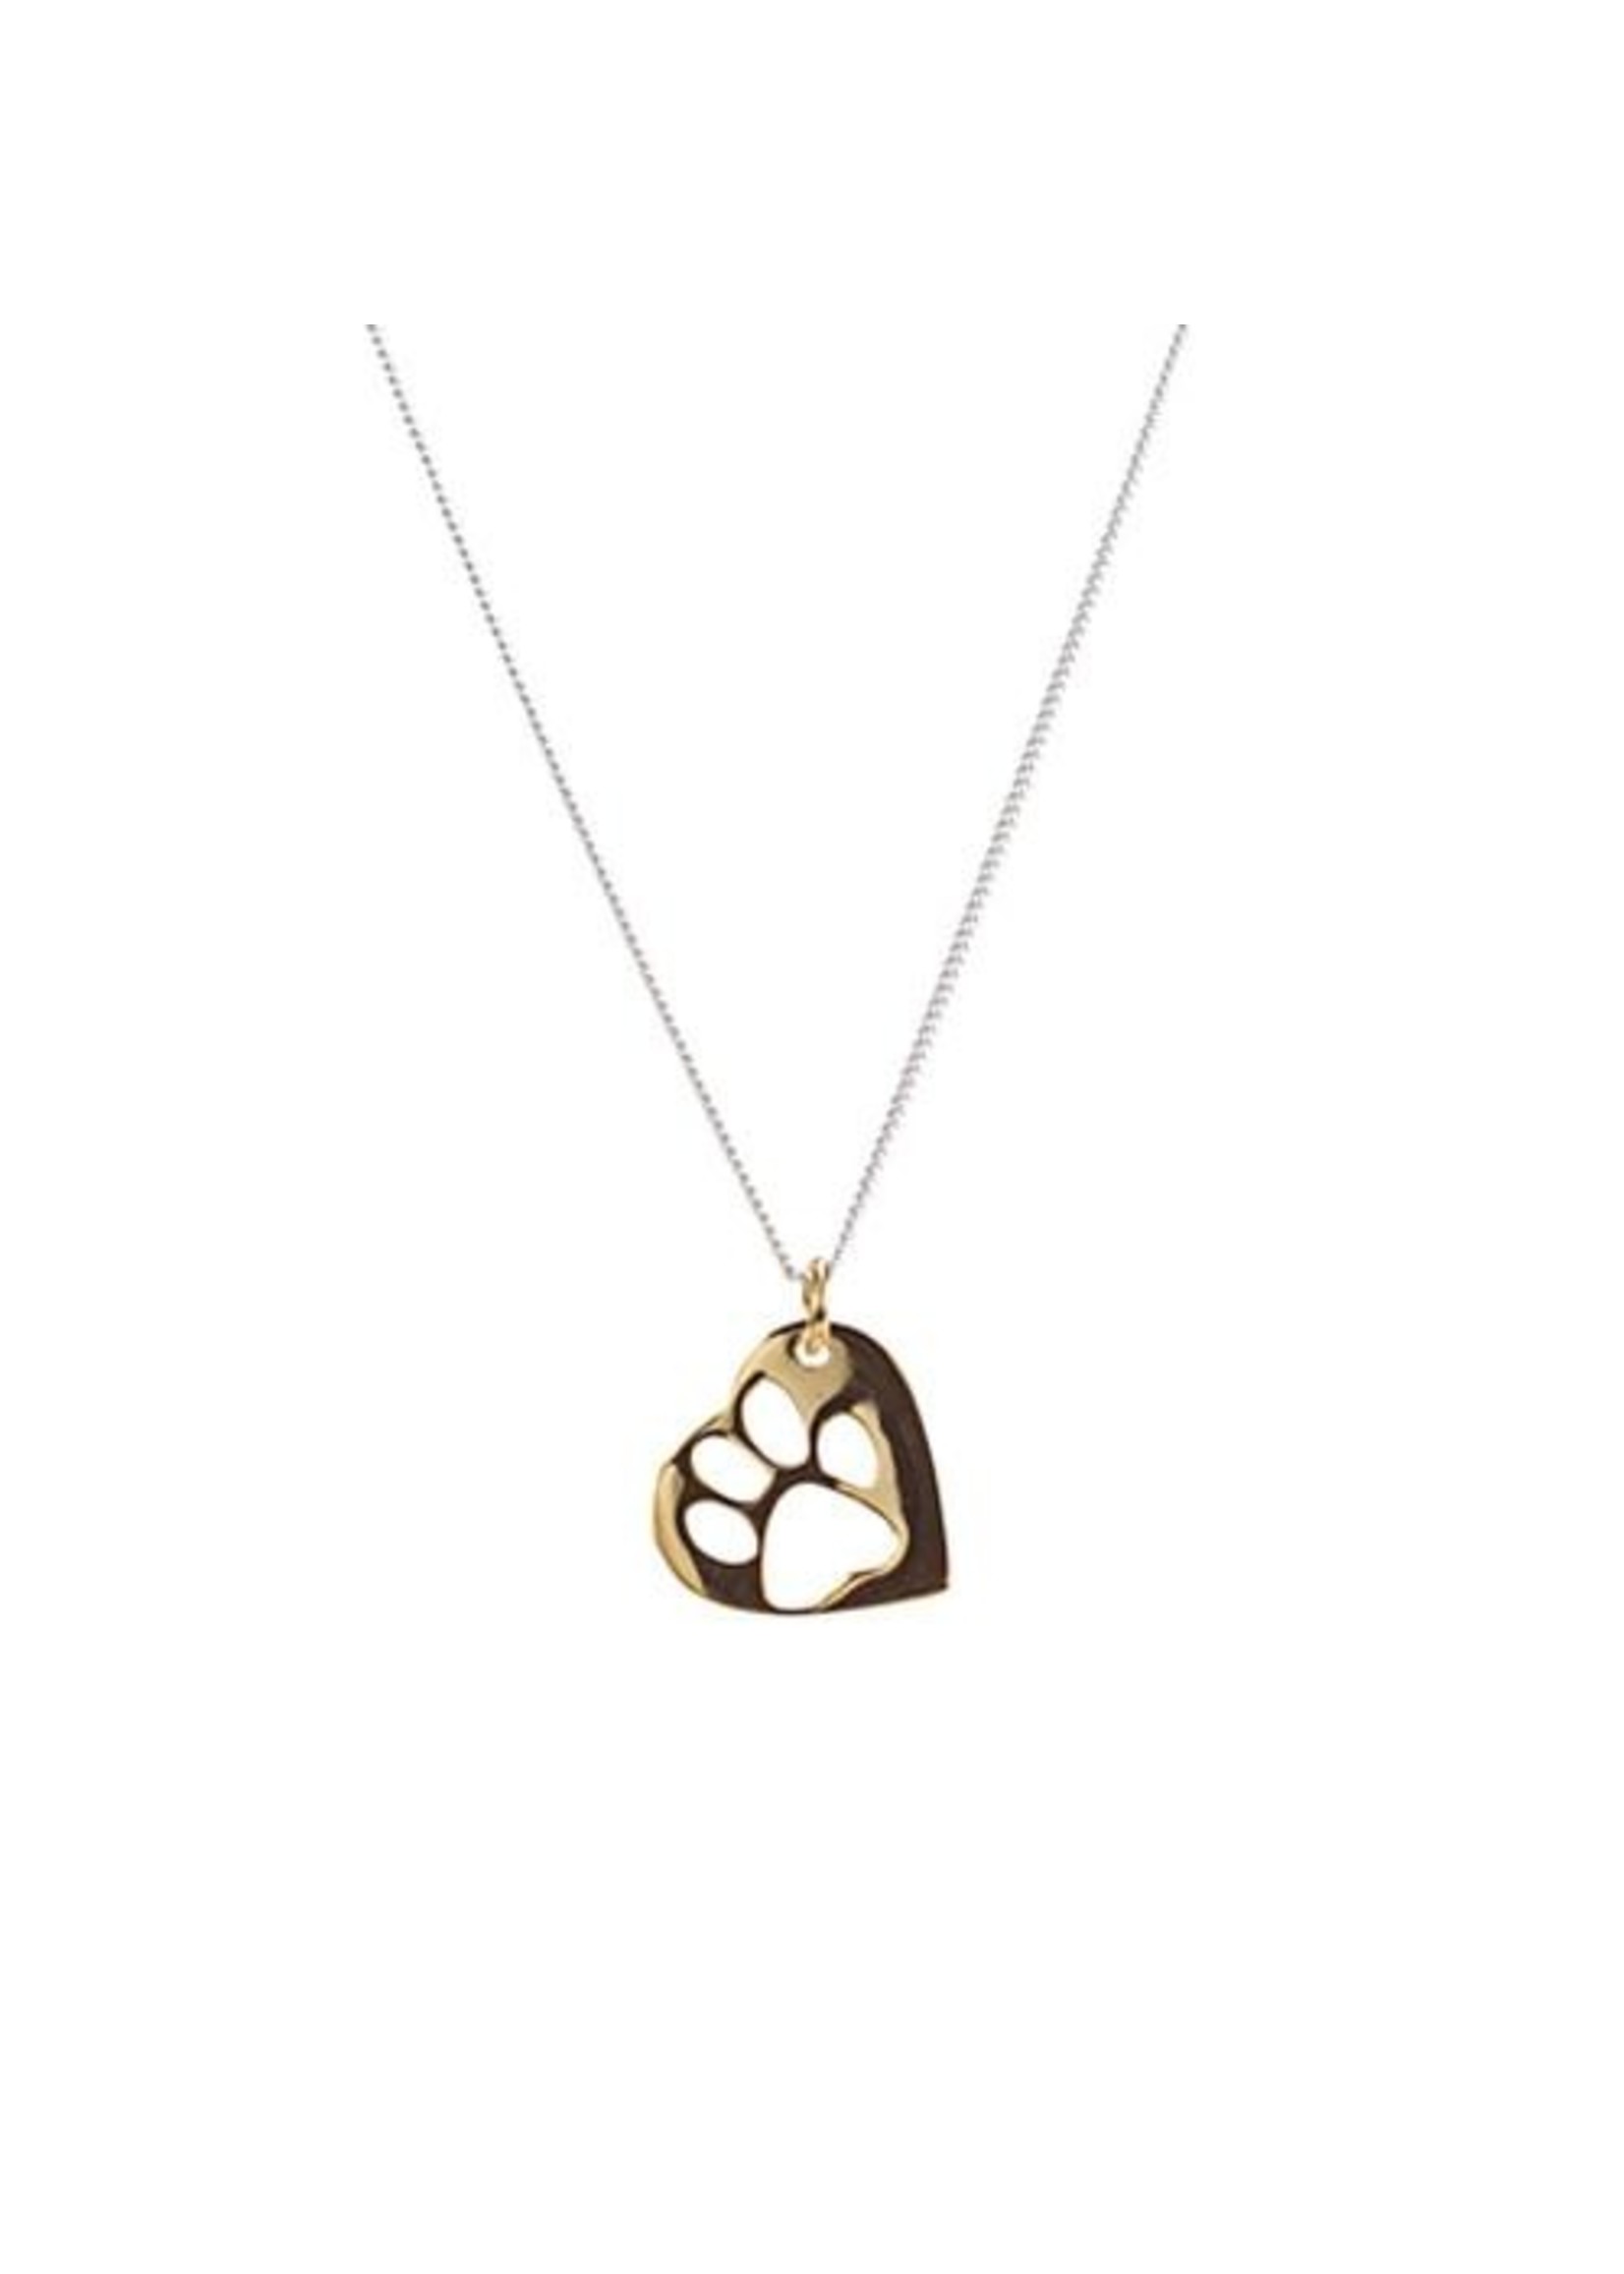 Mimi & Marge PAW PRINT NECKLACE- 14K GOLD VERMEILLE- HELPS ANIMAL WELFARE